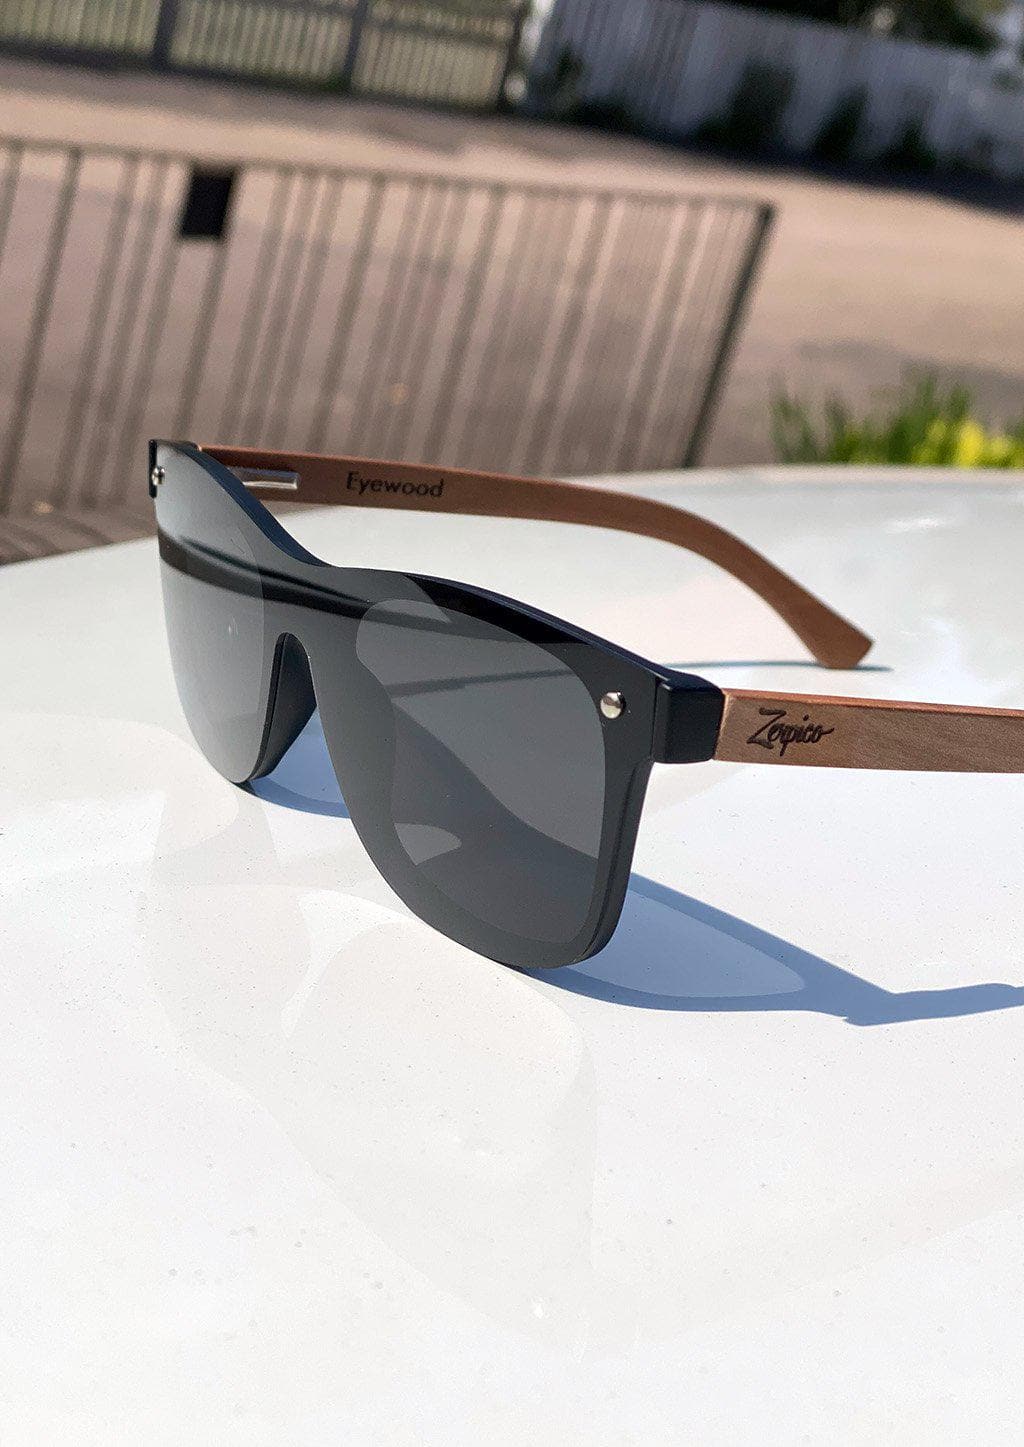 Eyewood tomorrow is our modern cool take on classic models. This is Taurus with black lenses. Nice wooden sunglasses. On White car with details.